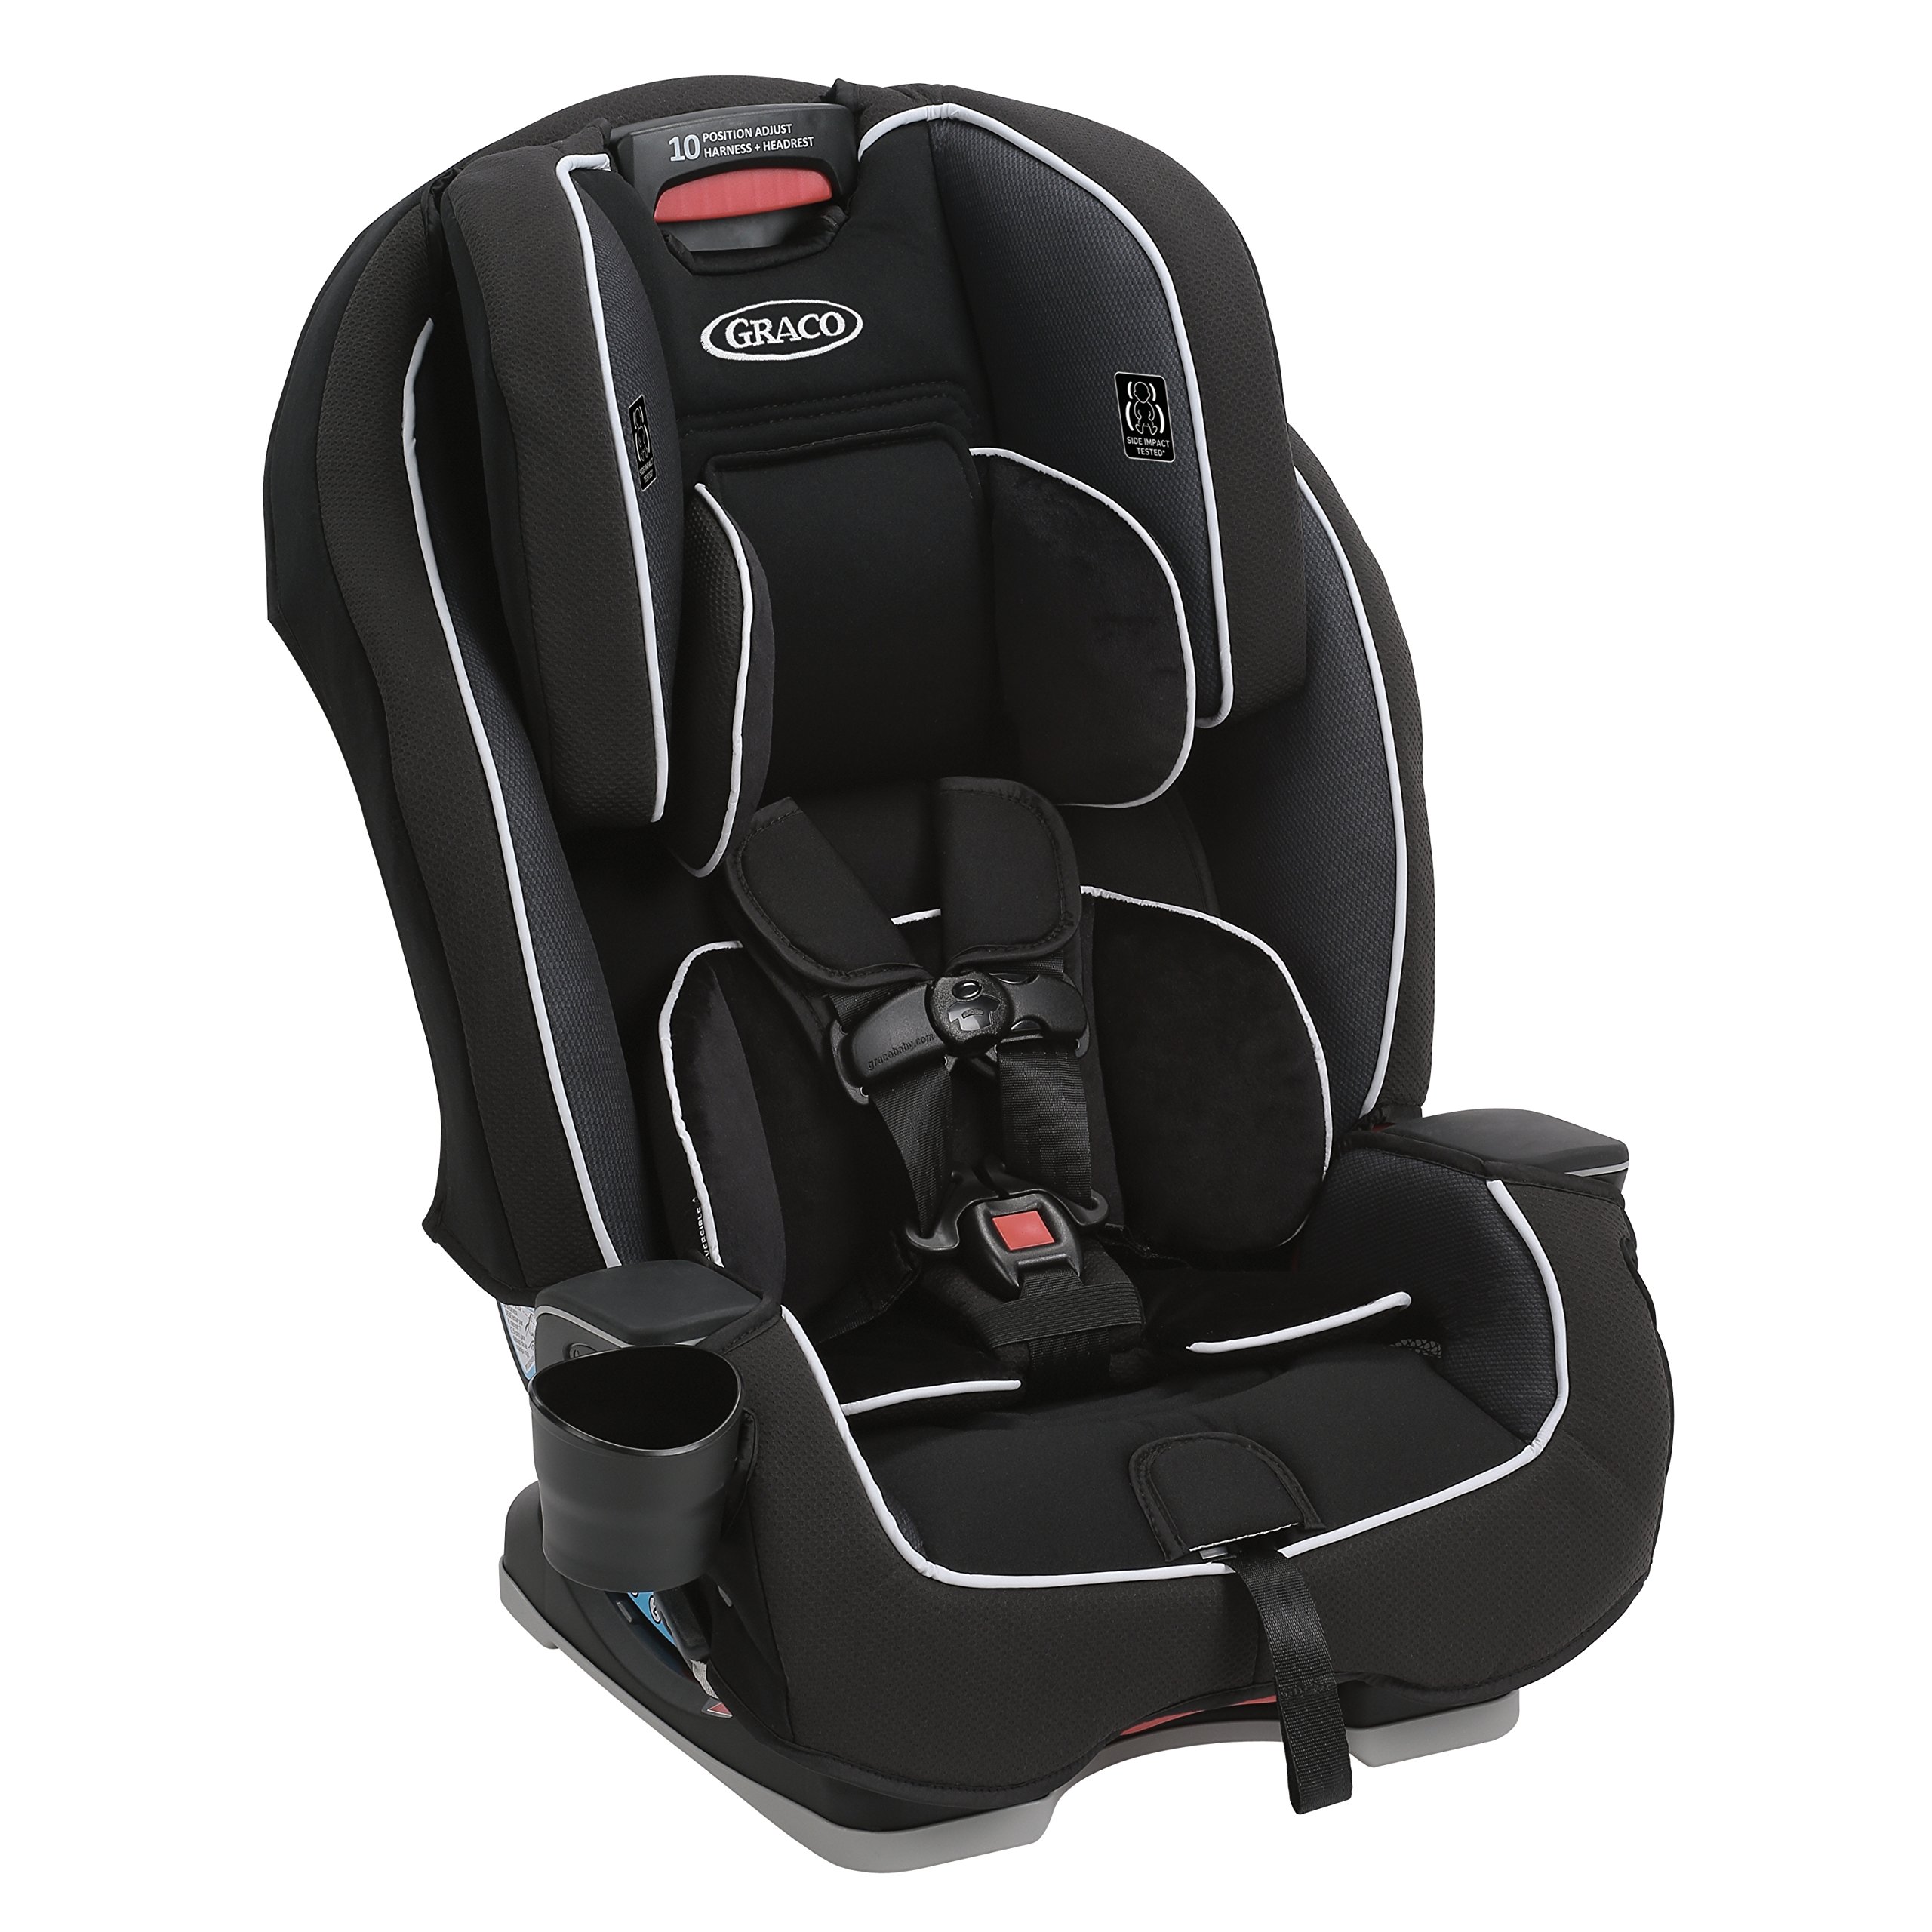 Graco Milestone 3 in 1 Convertible Car Seat | Infant to Toddler Car Seat, Black